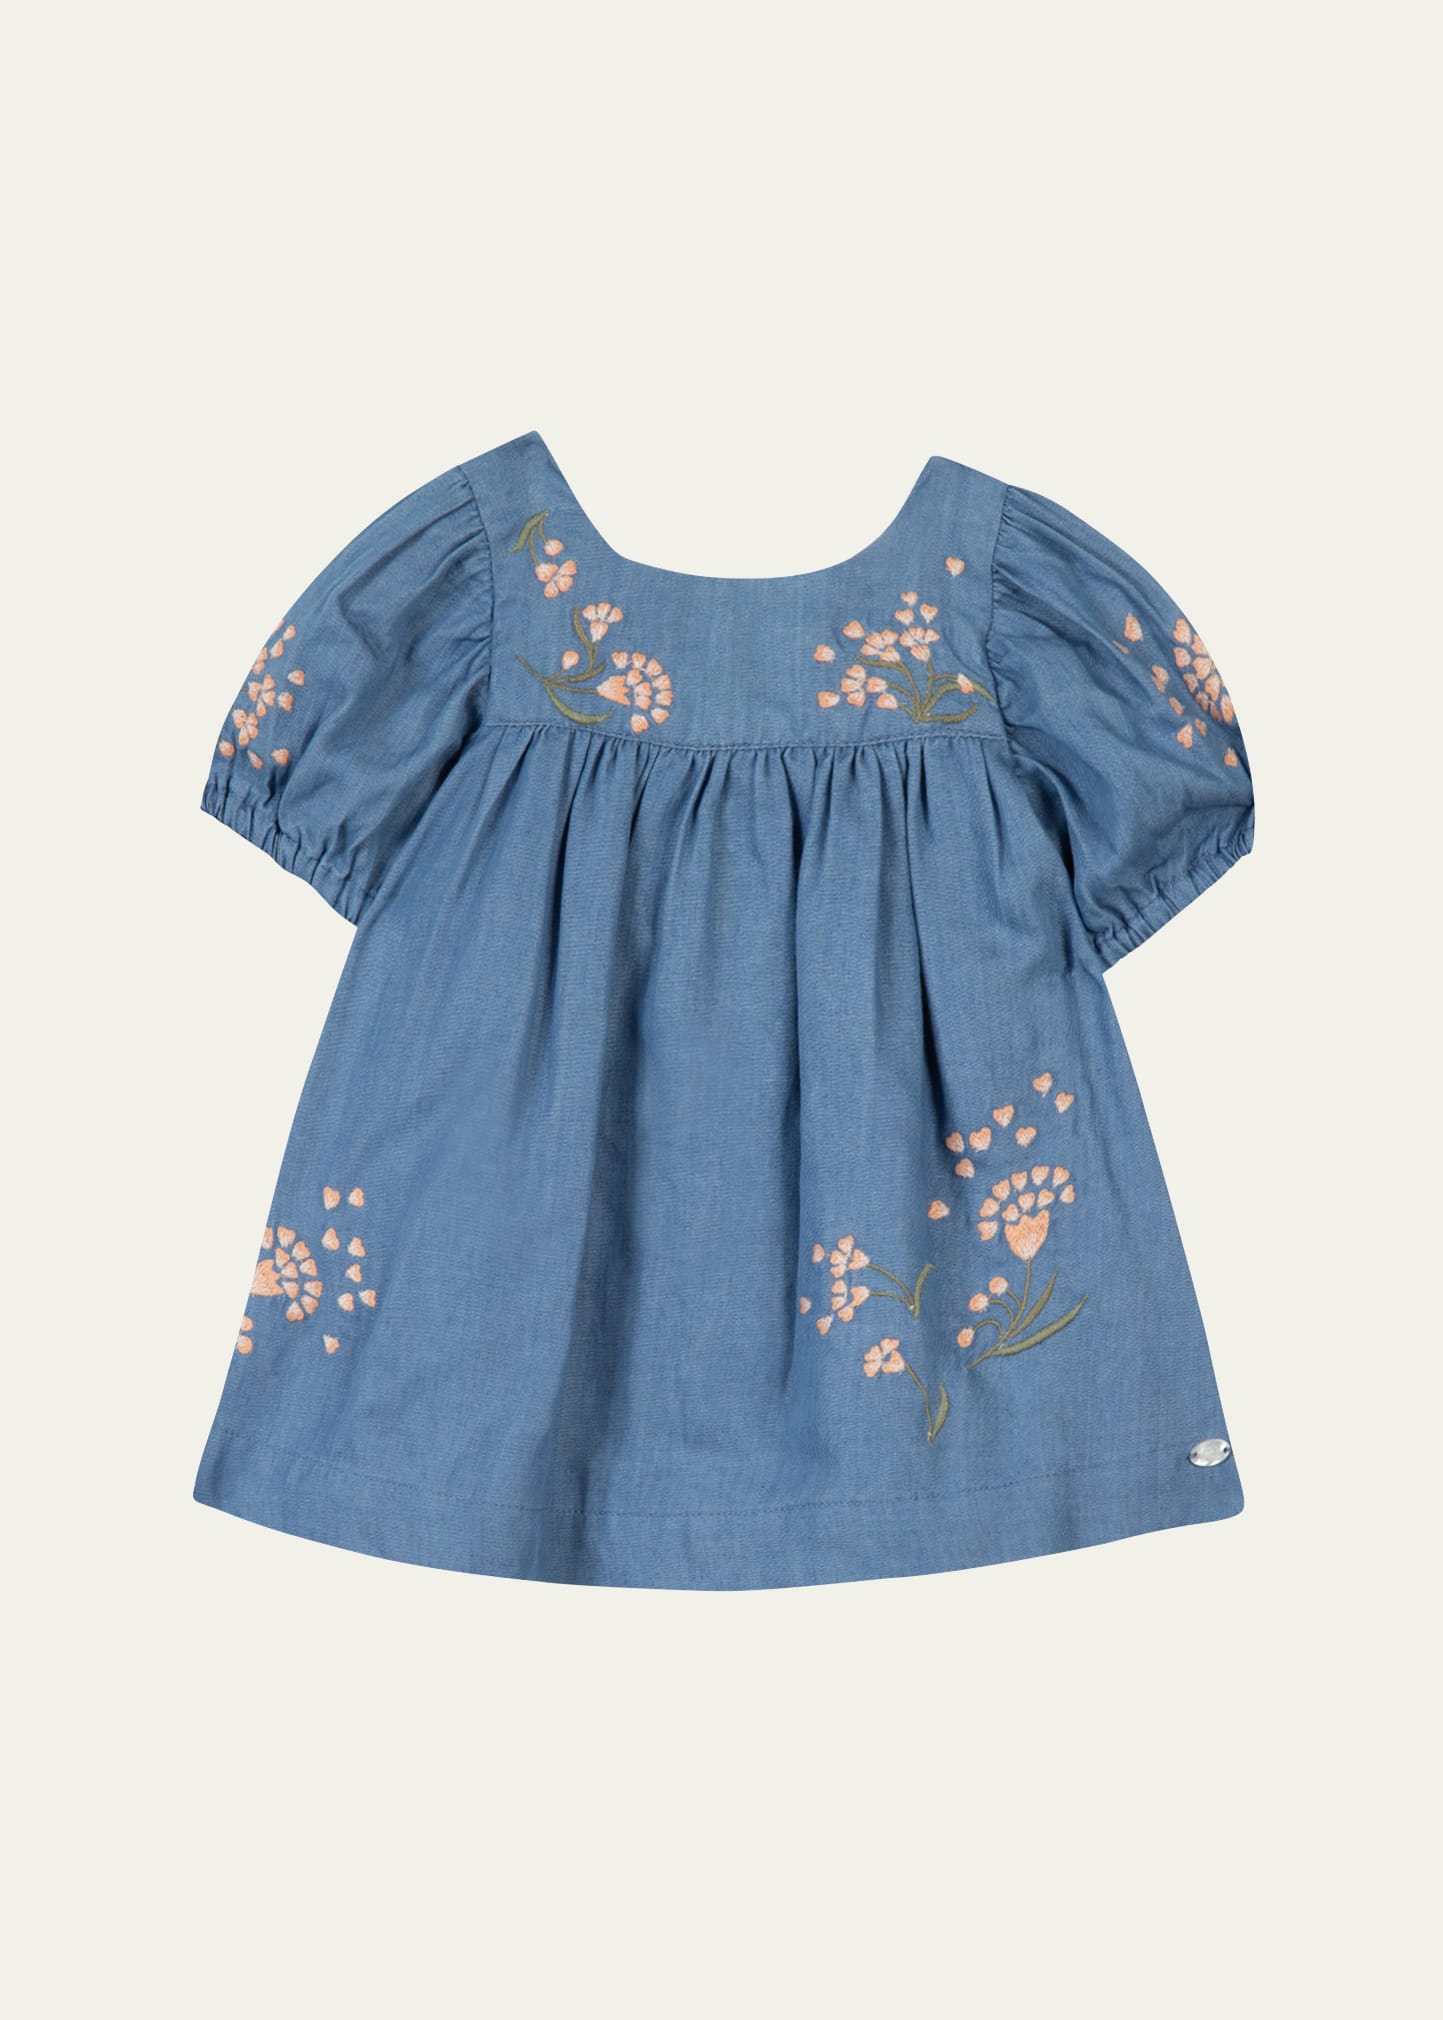 Girl's Floral Embroidered Chambray Dress, Size 9M-3